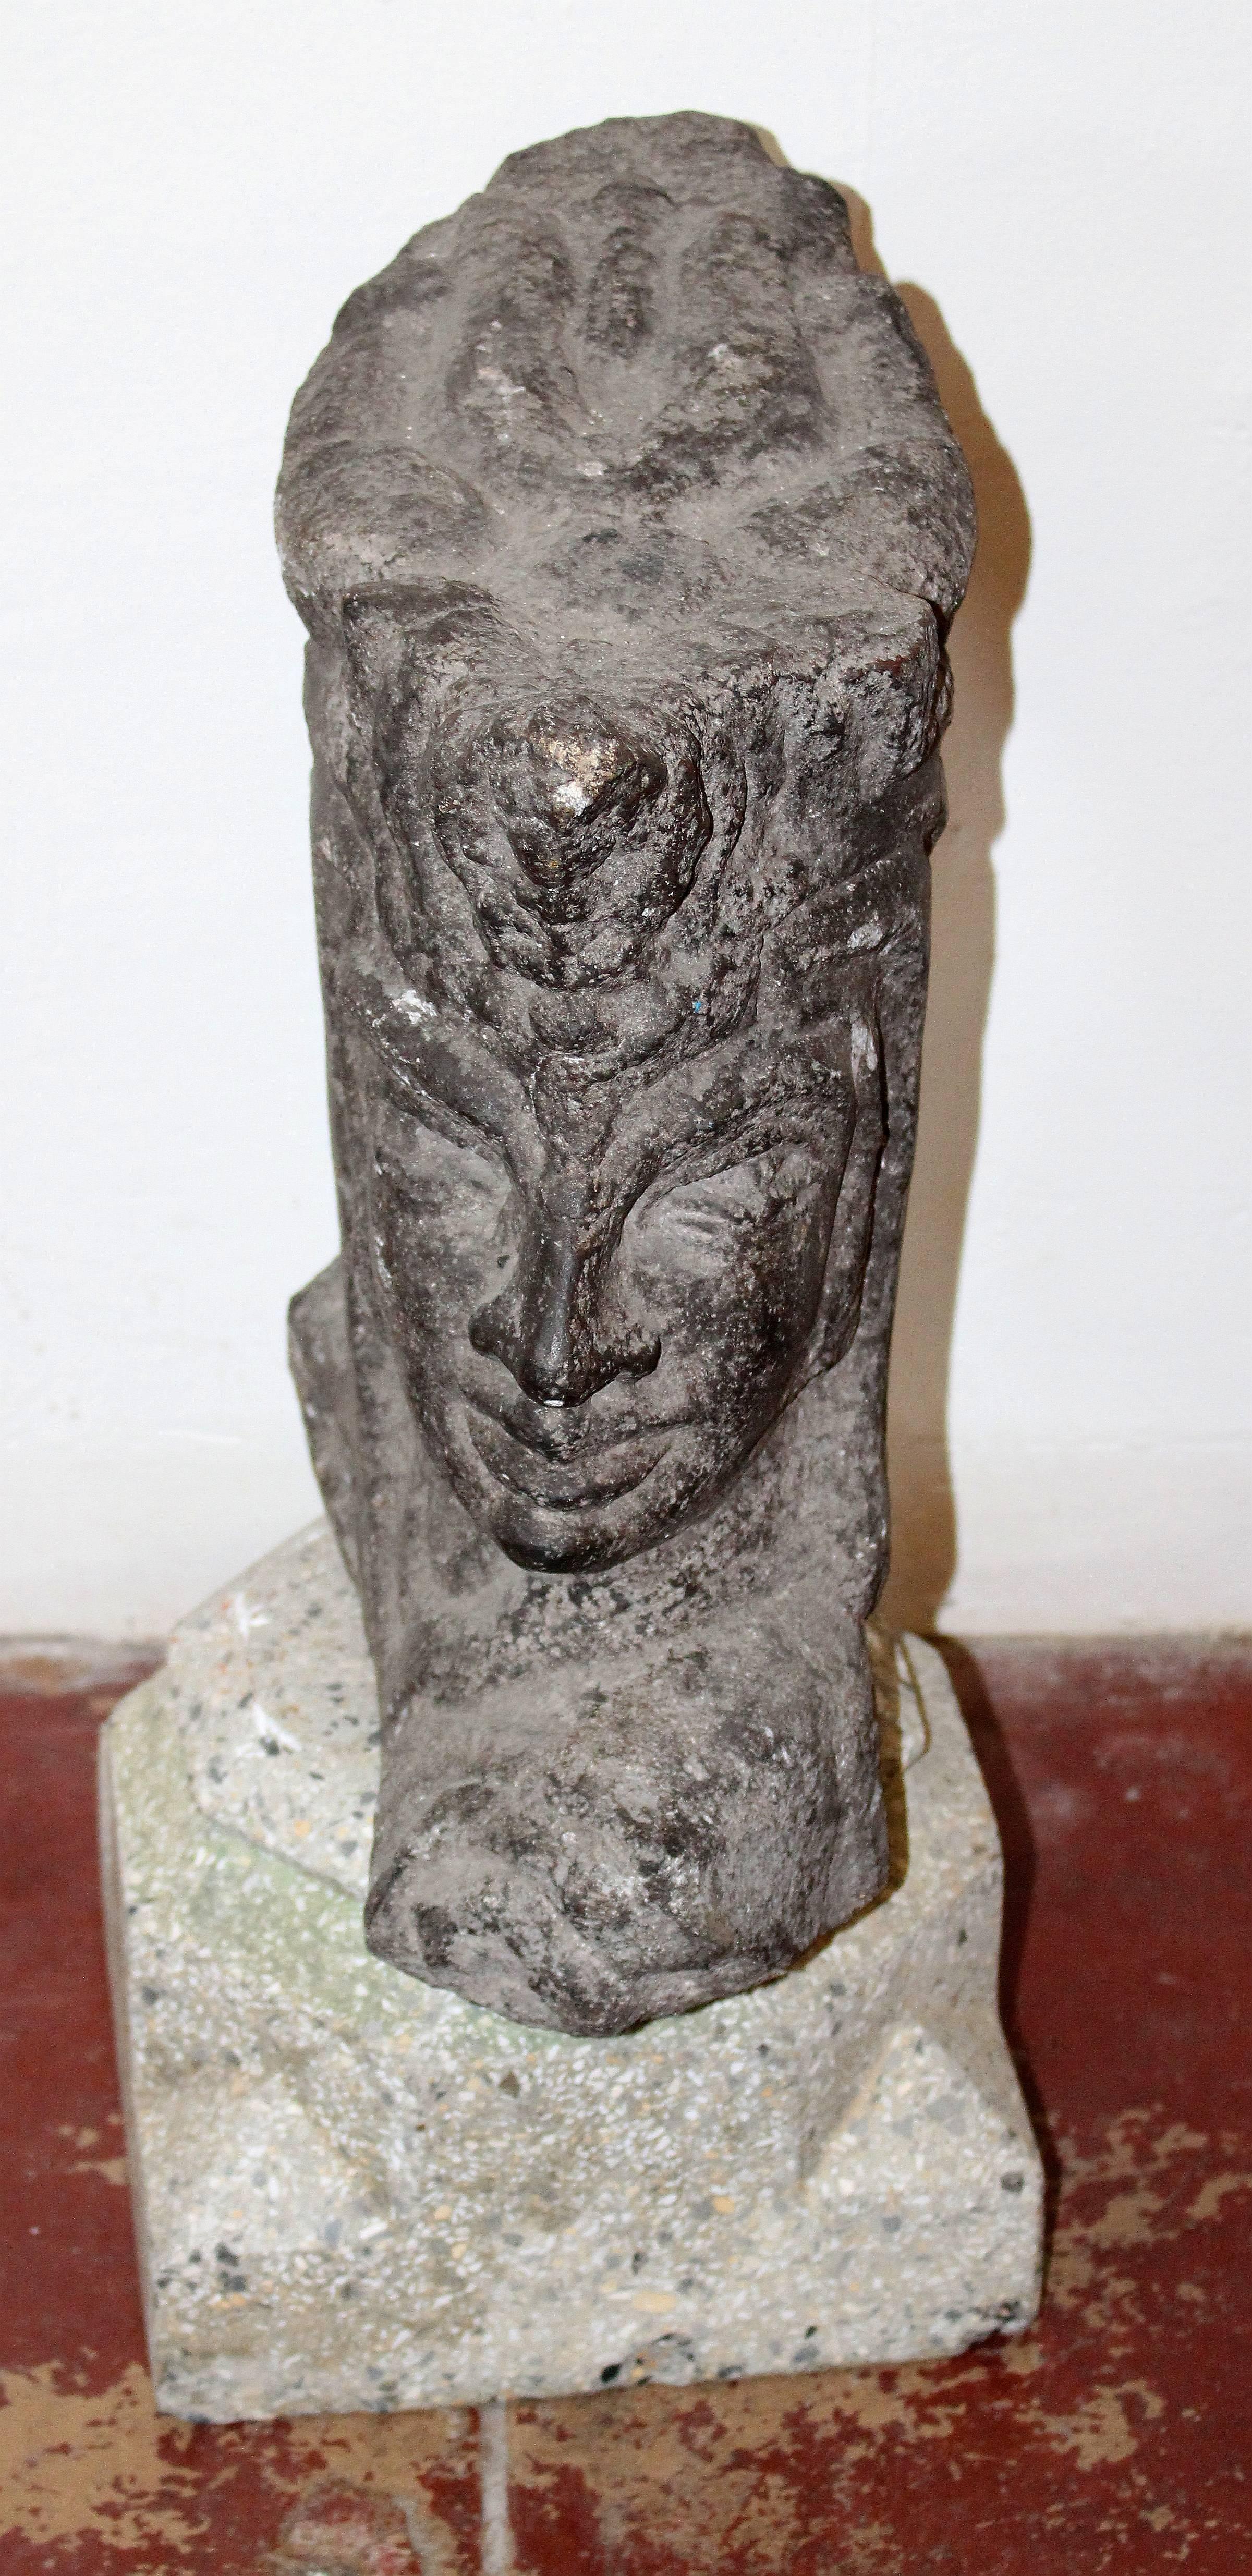 Mid-Century Trojan head sculpture .Carved stone head .Sculpture is selling without the stone column and the measurements are only related to the head sculpture.